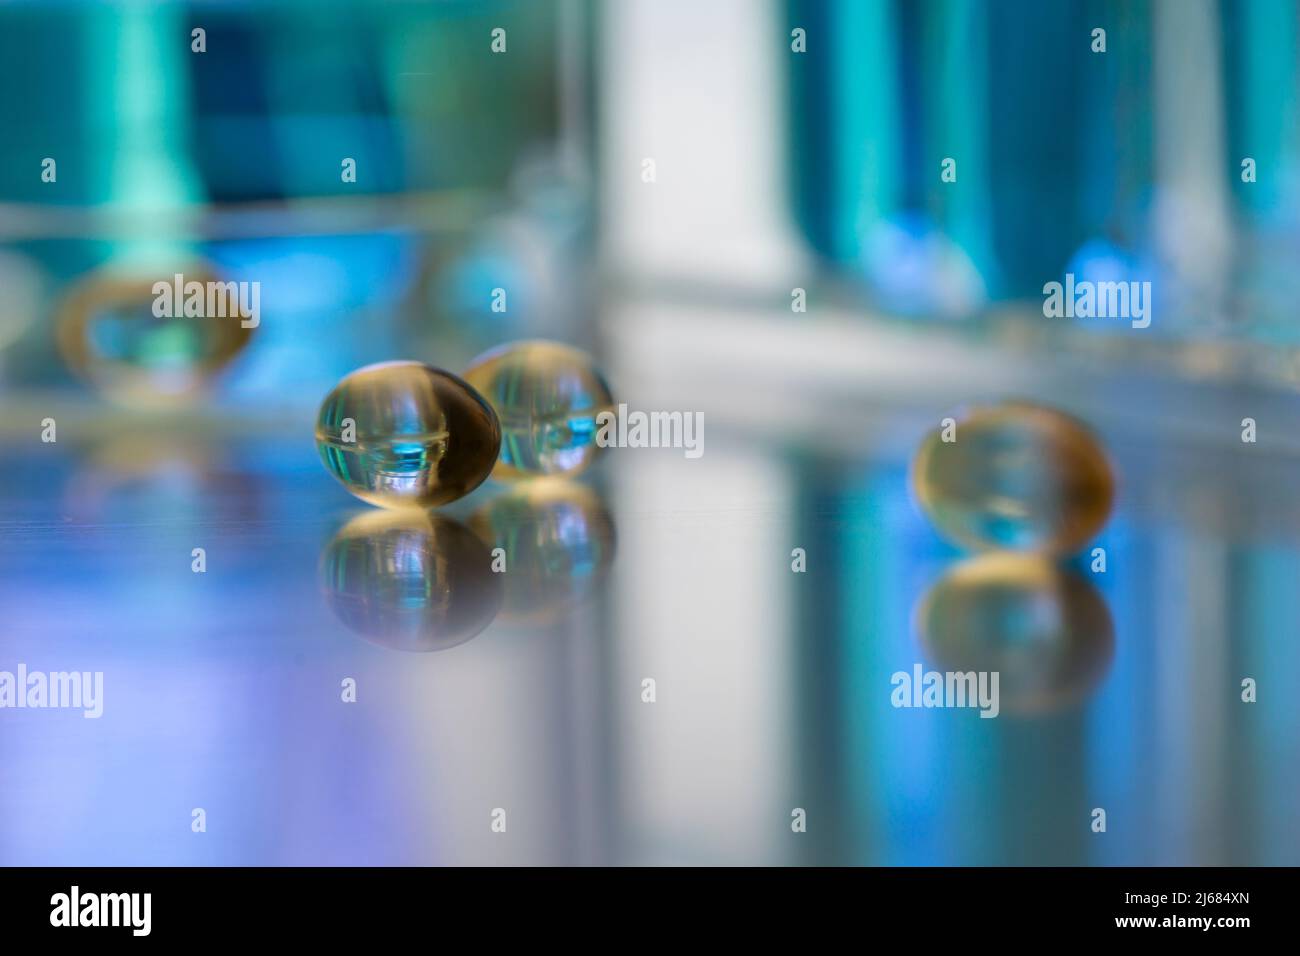 Soft capsules scattered on a medical research bench - stock photo Stock Photo